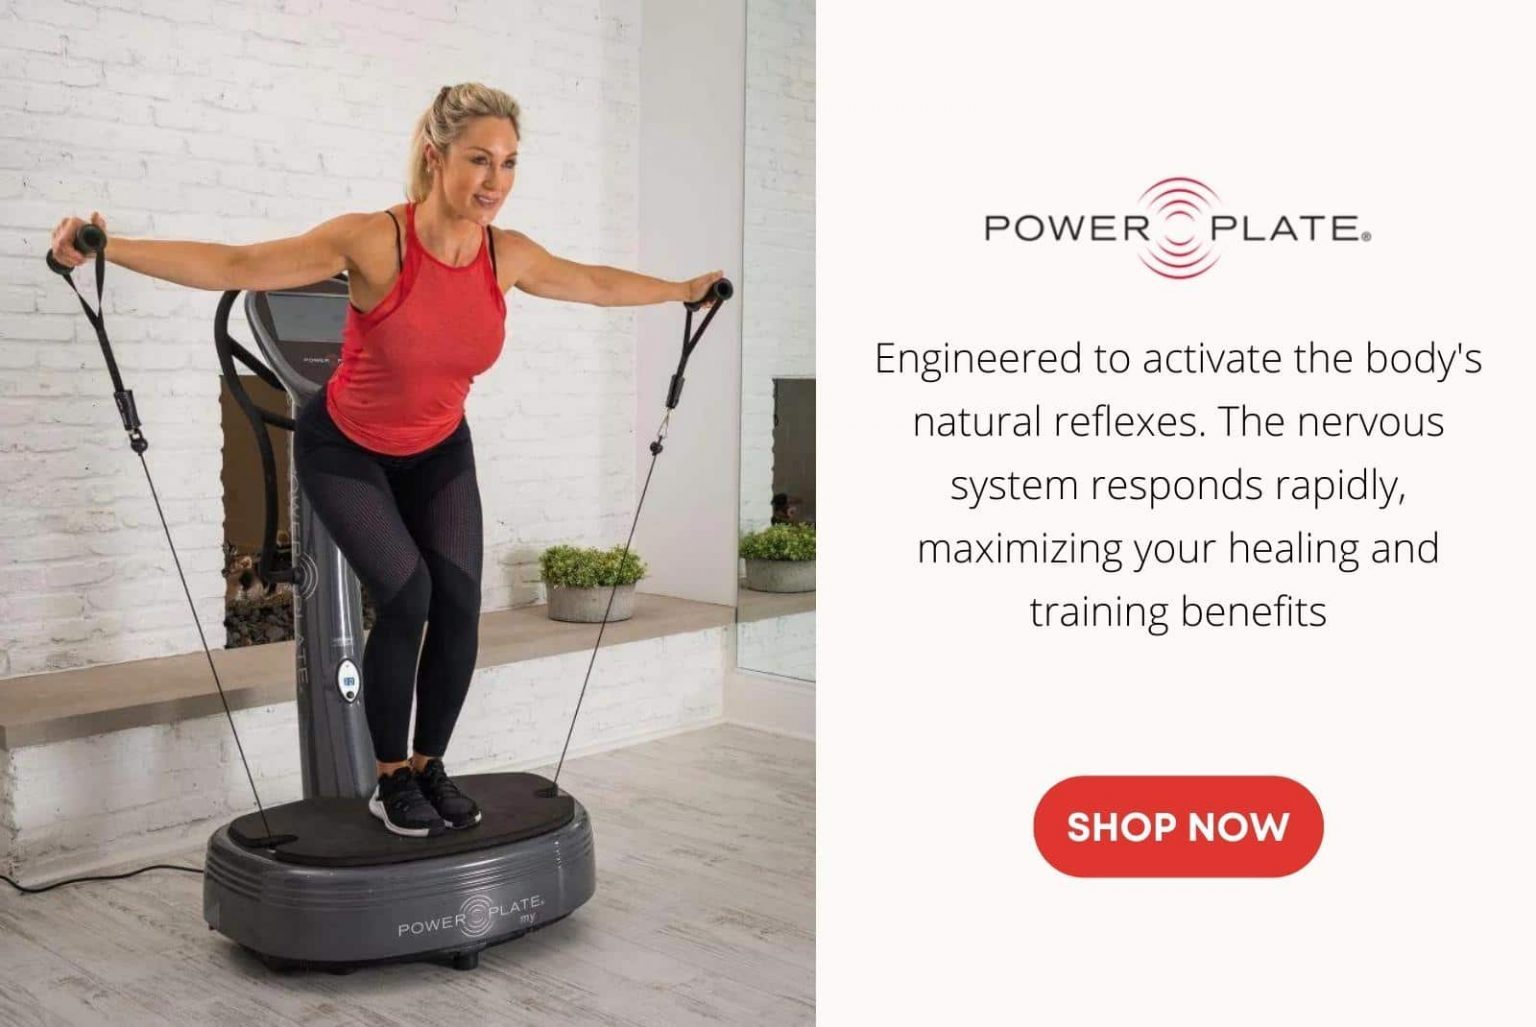 Maximize your training and health benefits with the Power Plate my7